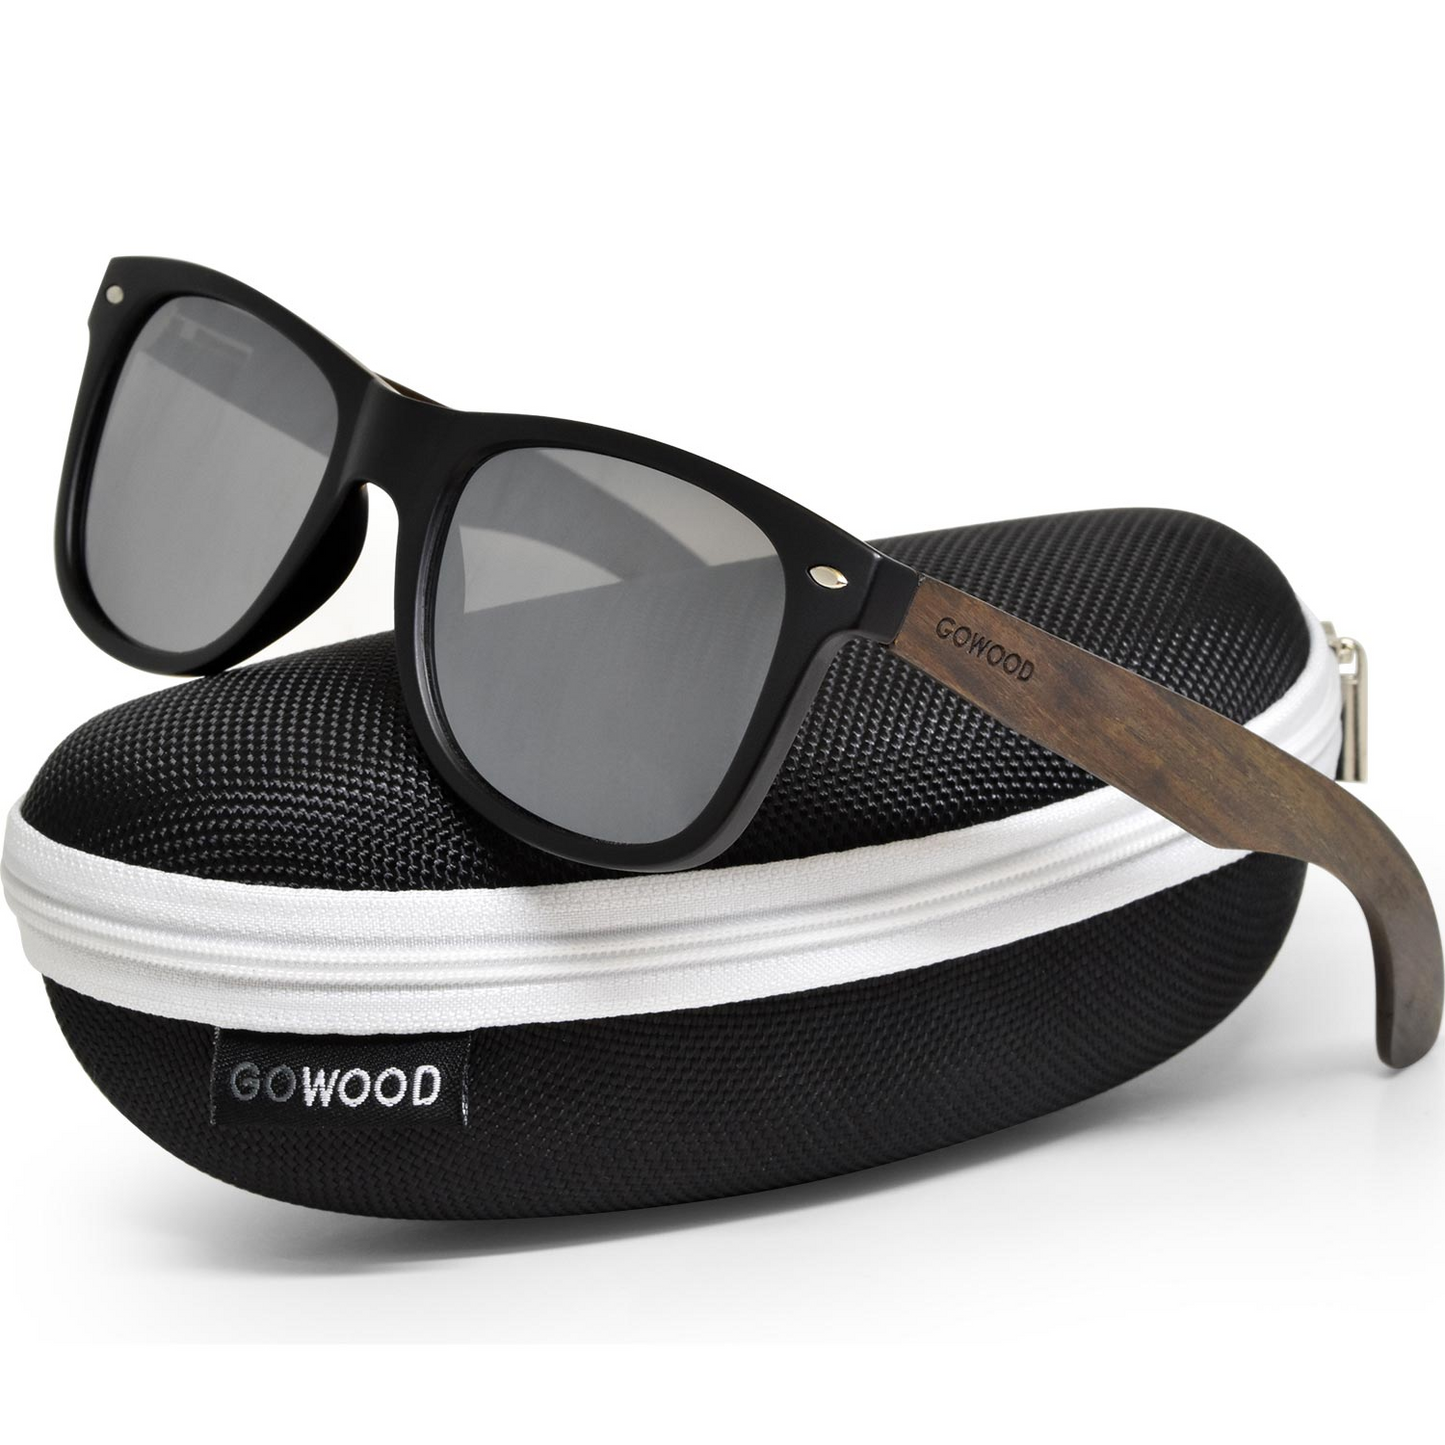 Ebony wood classic style sunglasses with silver mirrored polarized lenses